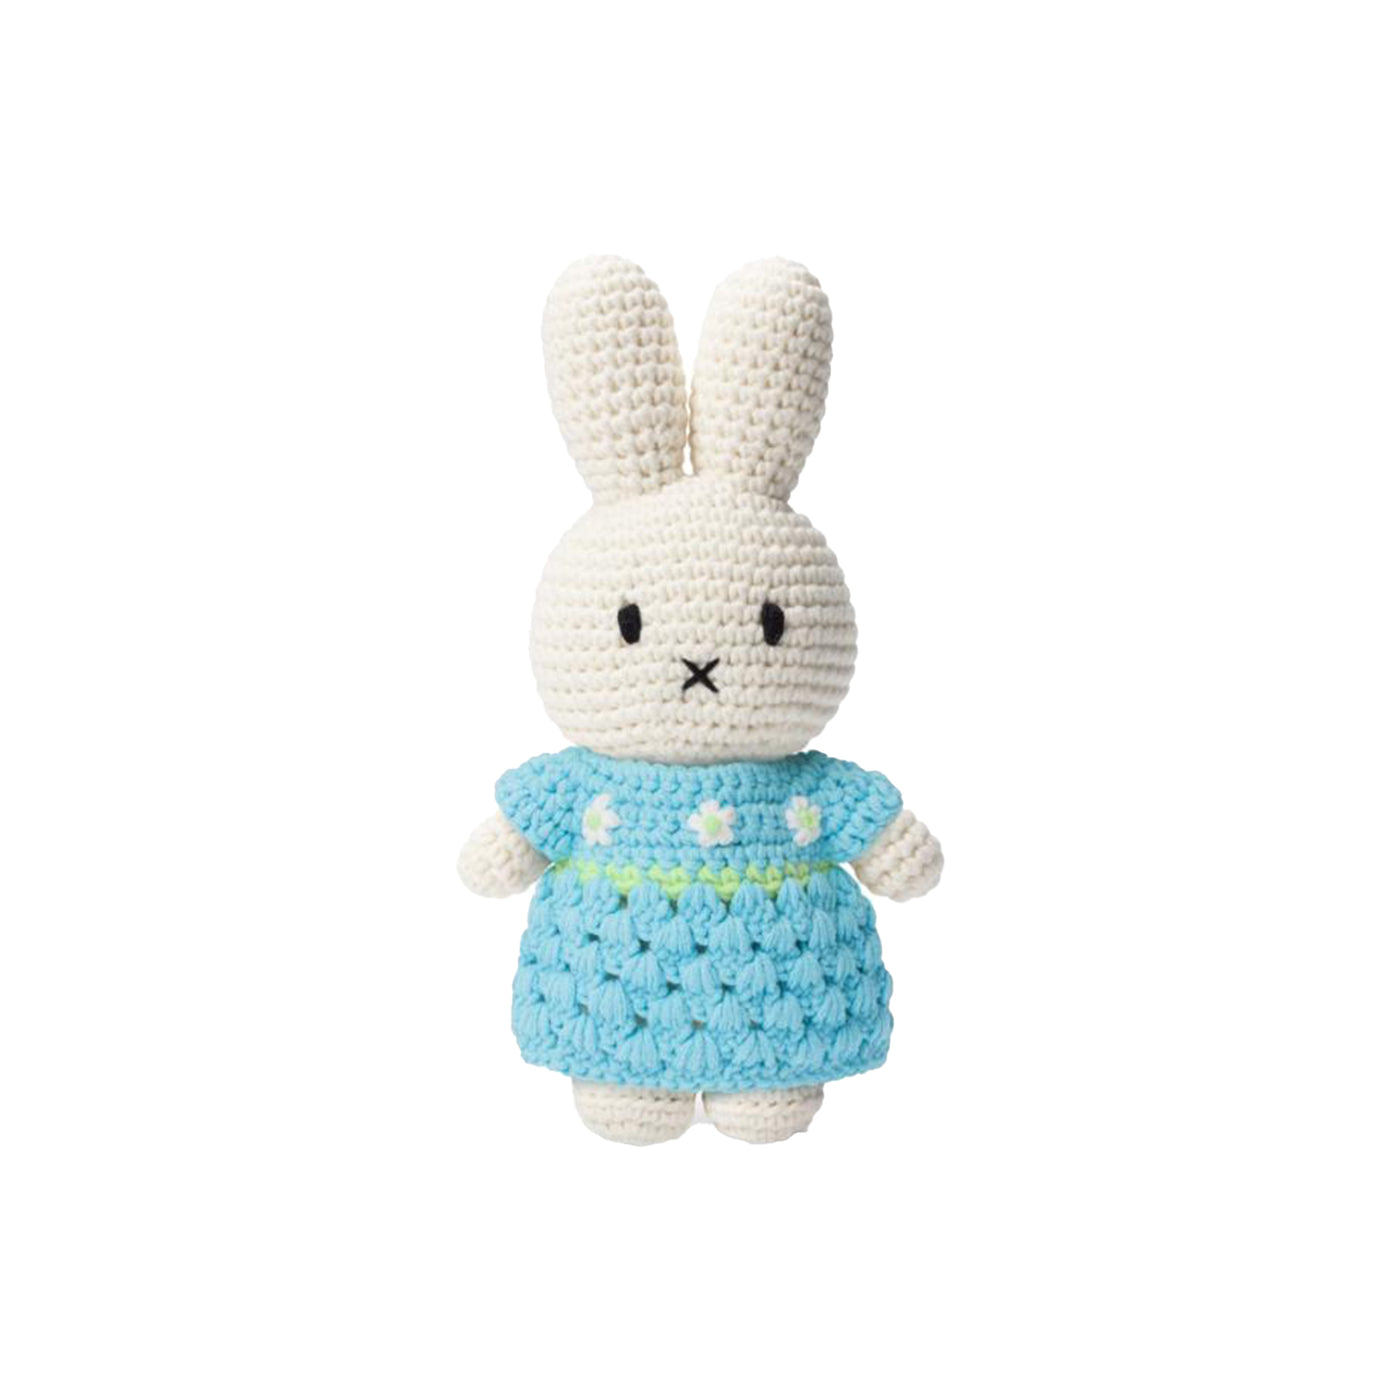 Miffy Crocheted Soft Toy - Almond Blossom Dress